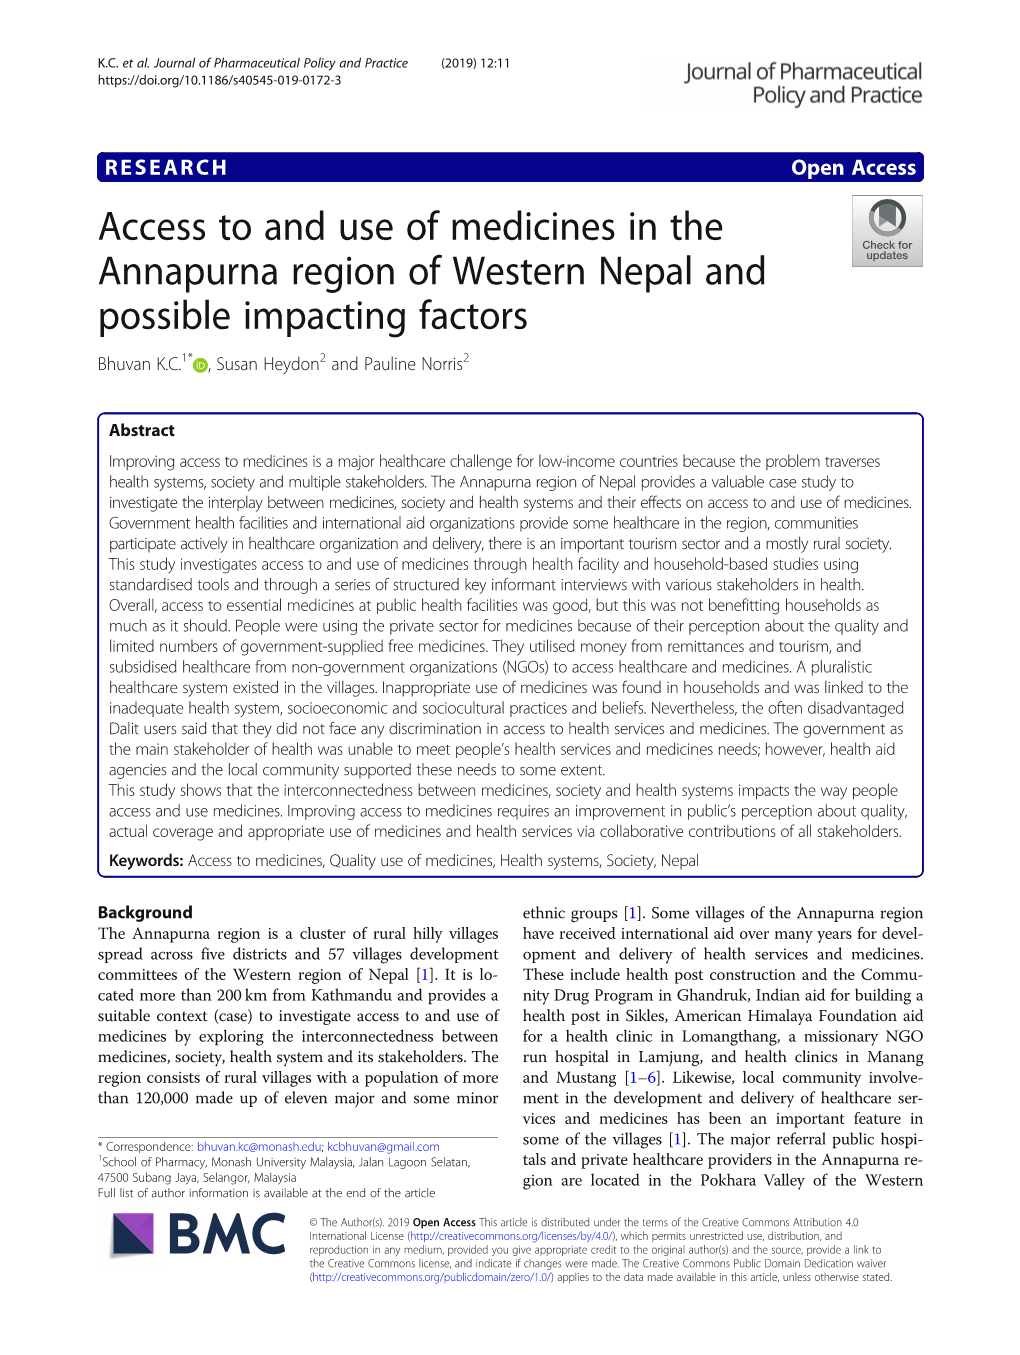 Access to and Use of Medicines in the Annapurna Region of Western Nepal and Possible Impacting Factors Bhuvan K.C.1* , Susan Heydon2 and Pauline Norris2